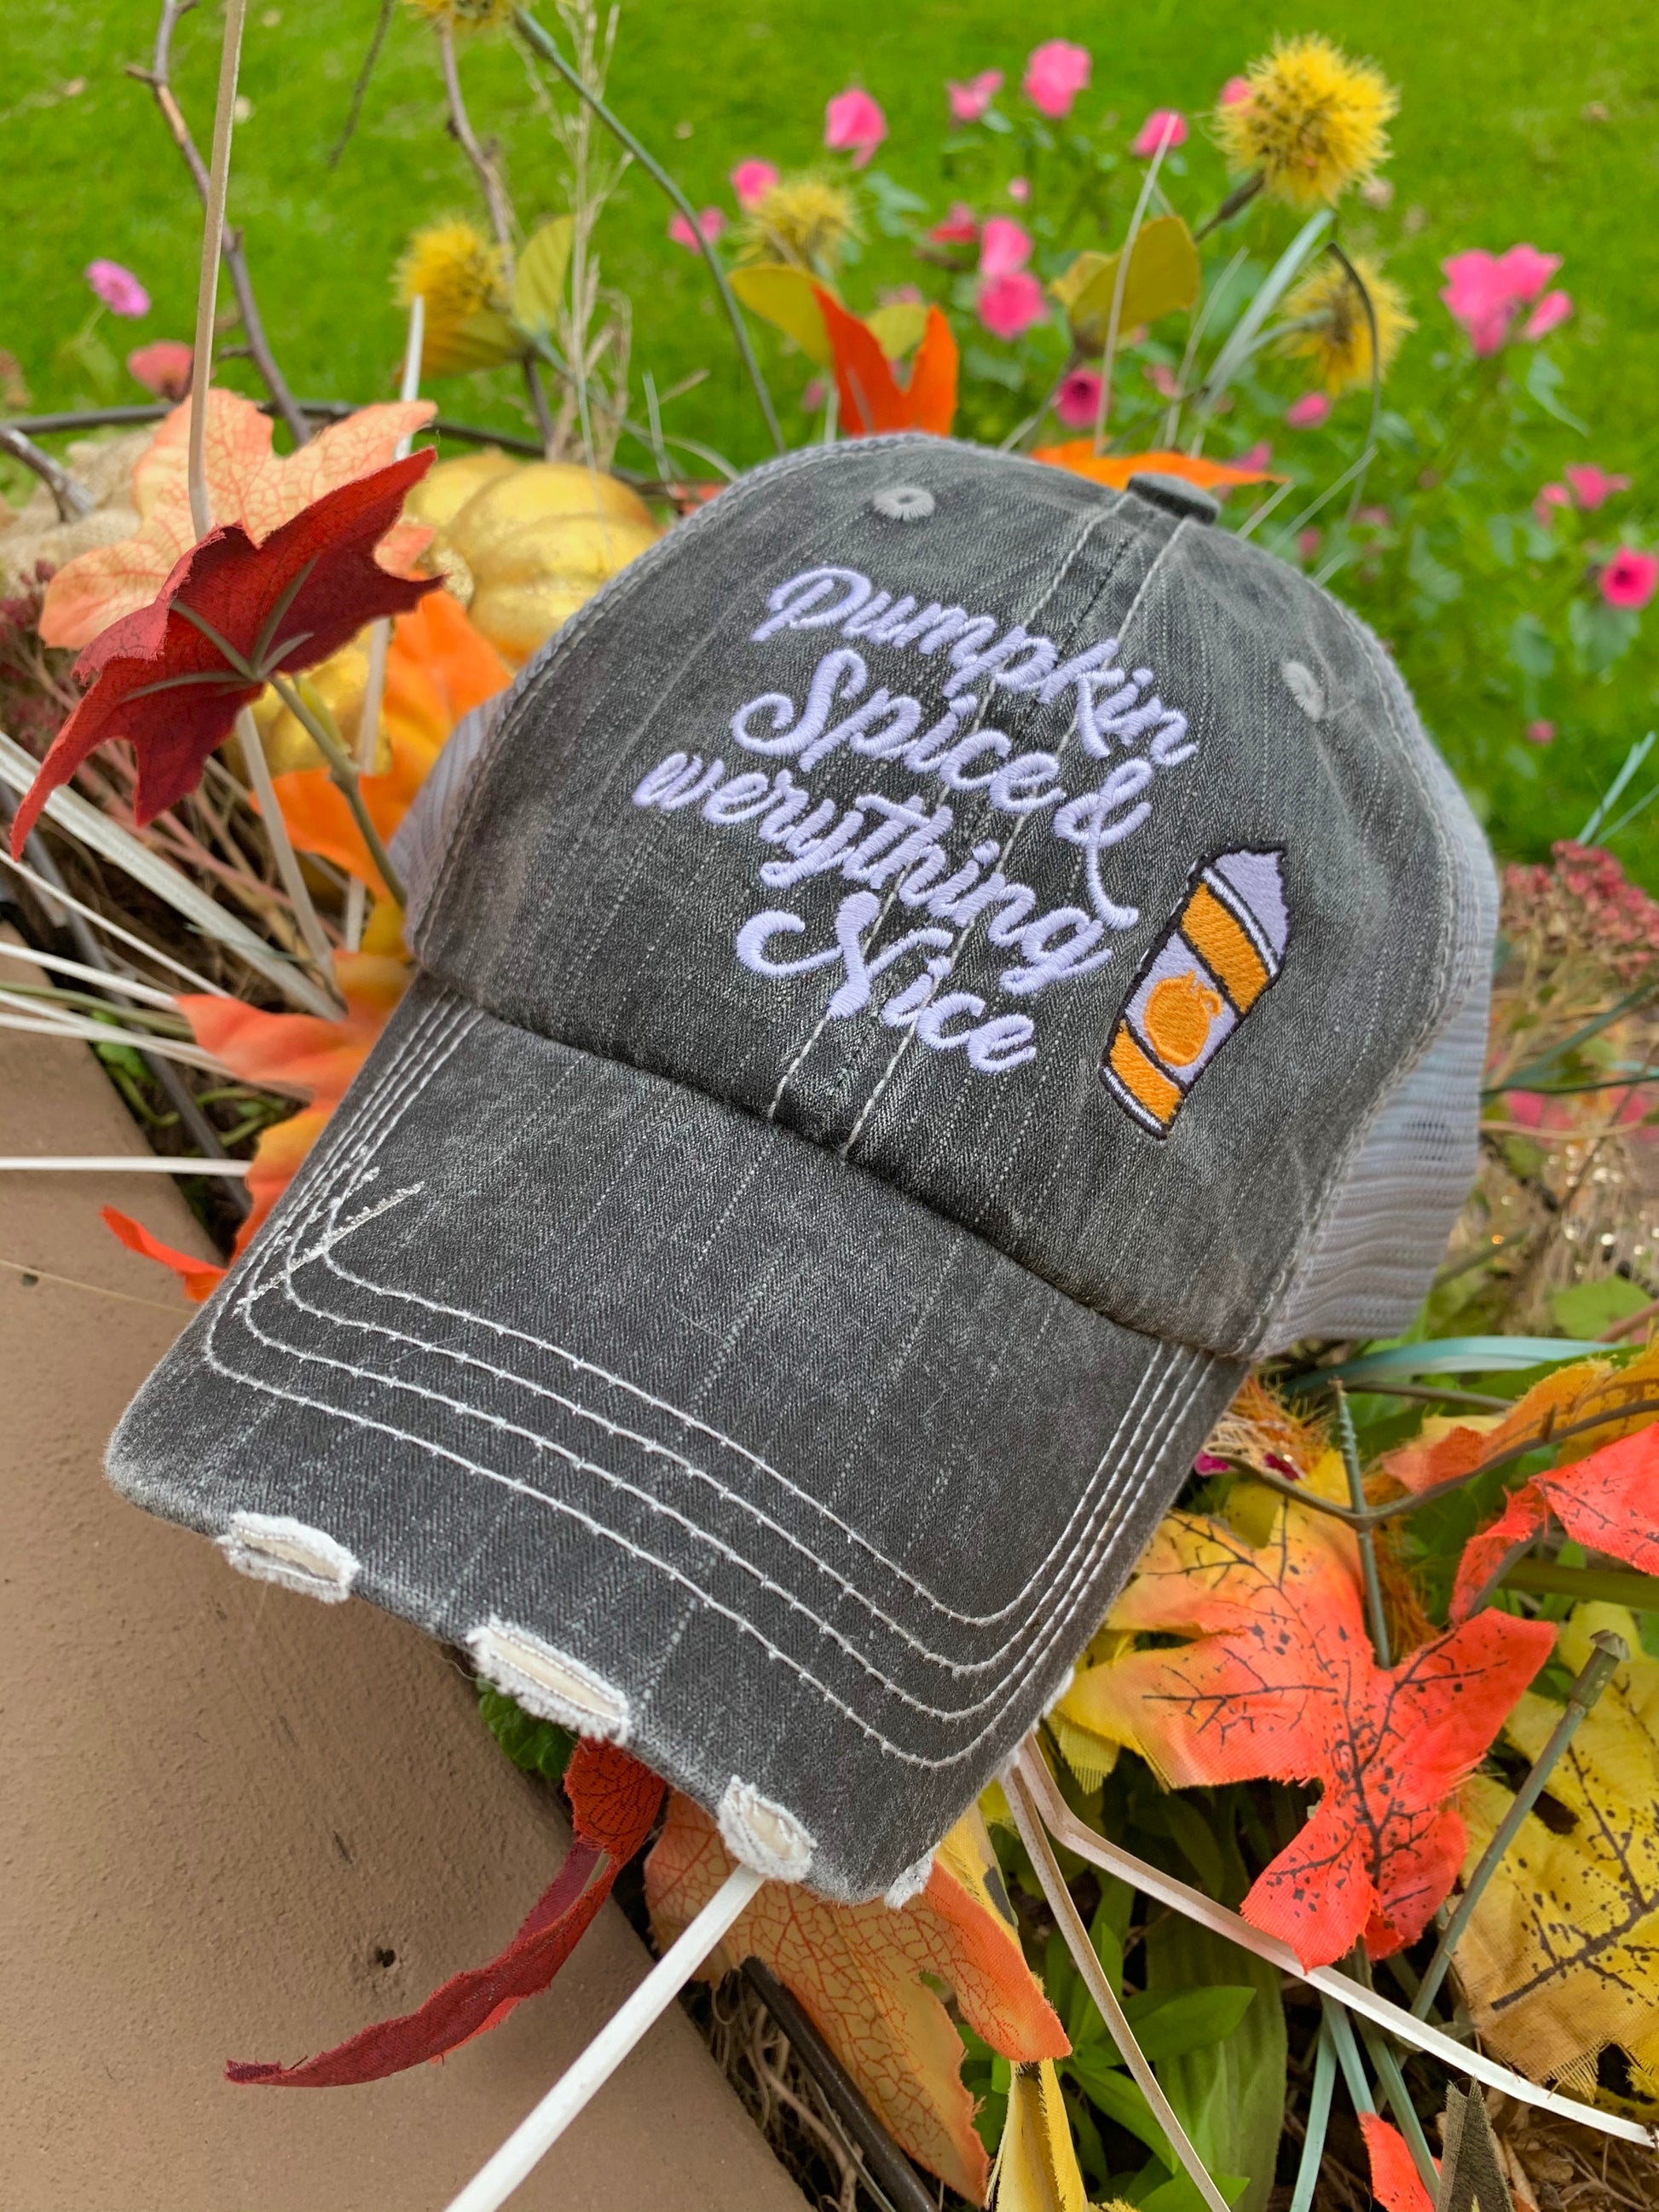 Hats { Pumpkin spice and everything nice } Pumpkin spice and Jesus. Pumpkin spice and chill. 3 sayings in 3 colors. Embroidered distressed trucker cap. Black suede. Black and white herringbone. Blanket Scarf. Plaid. - Stacy's Pink Martini Boutique